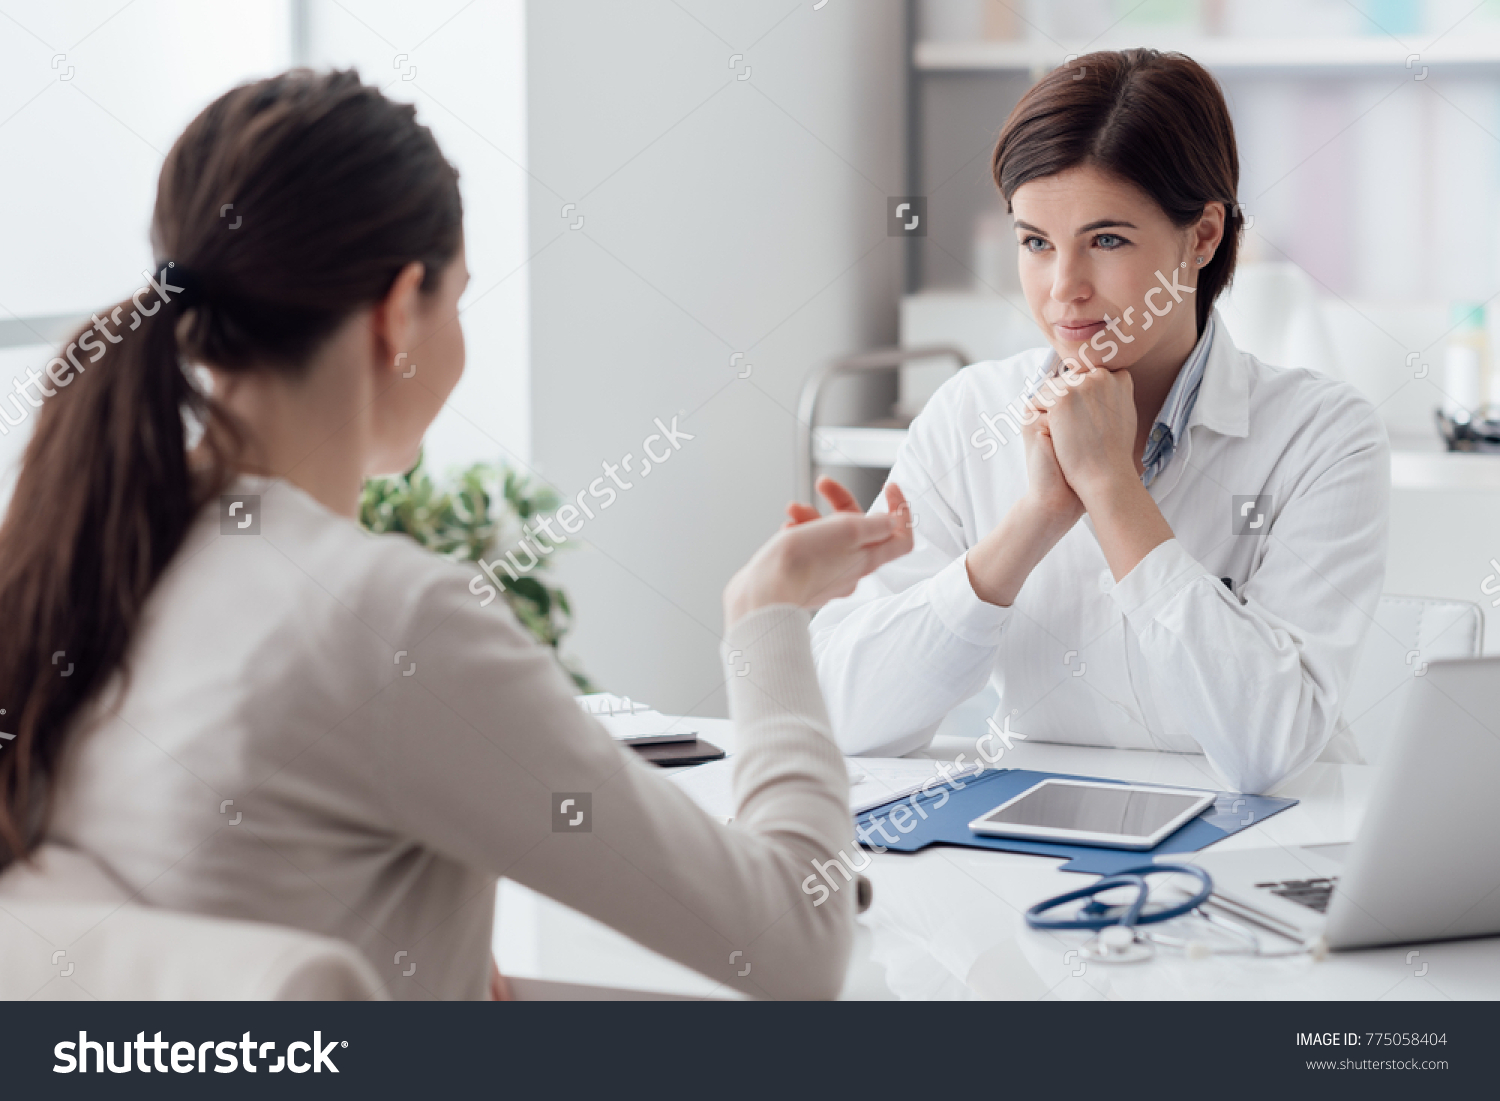 Doctor working in the office and listening to the patient, she is explaining her symptoms, healtcare and assistance concept #775058404